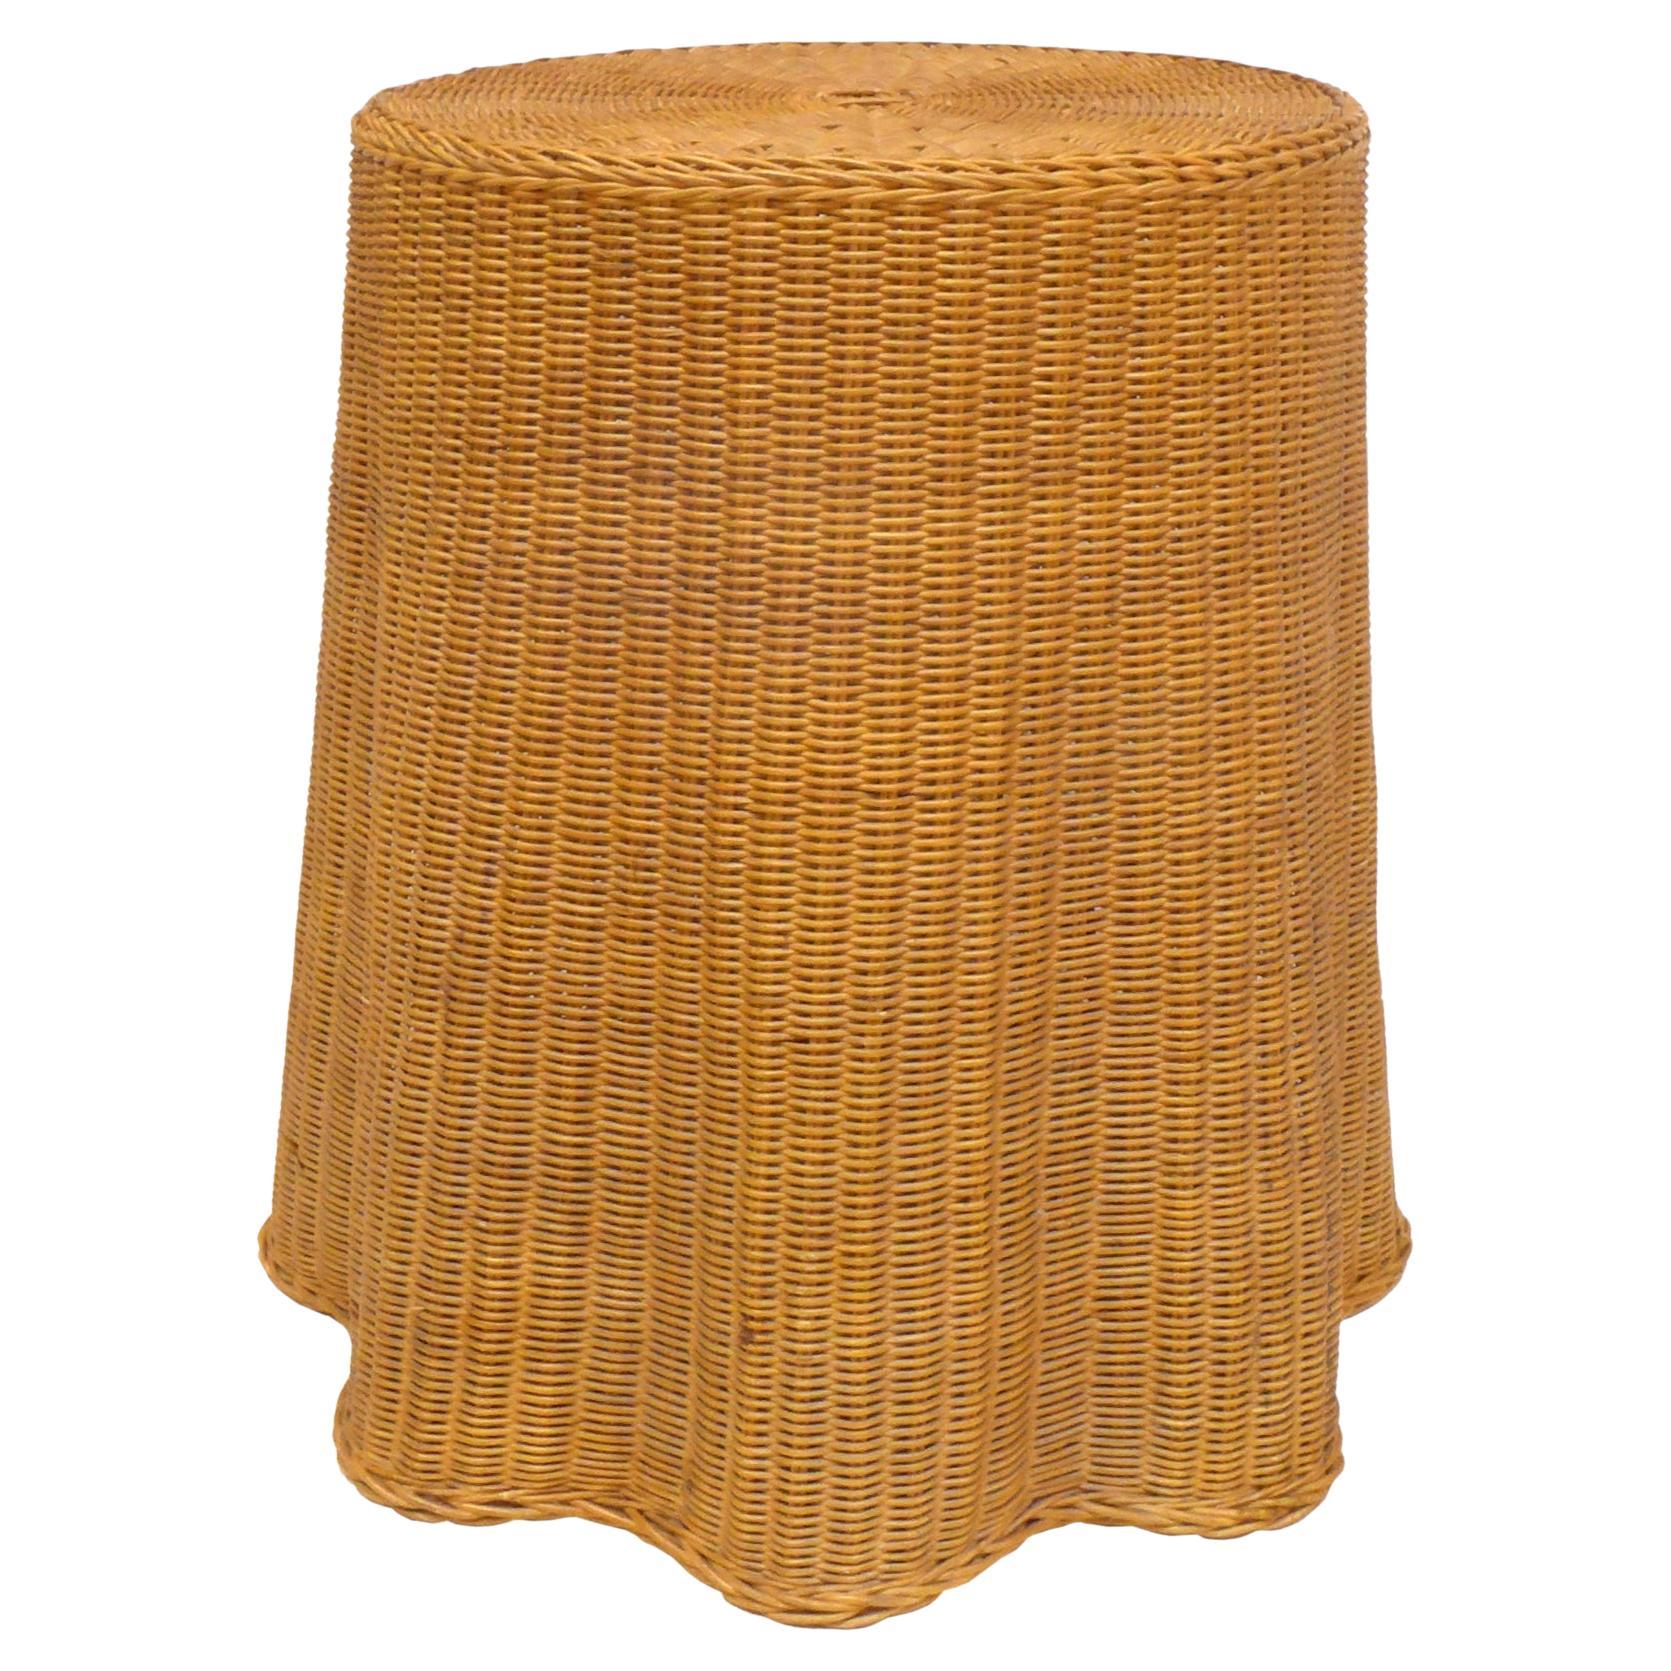 Trompe L'Oeil Woven Draped Rattan "Ghost" Side Table or Pedestal For Sale